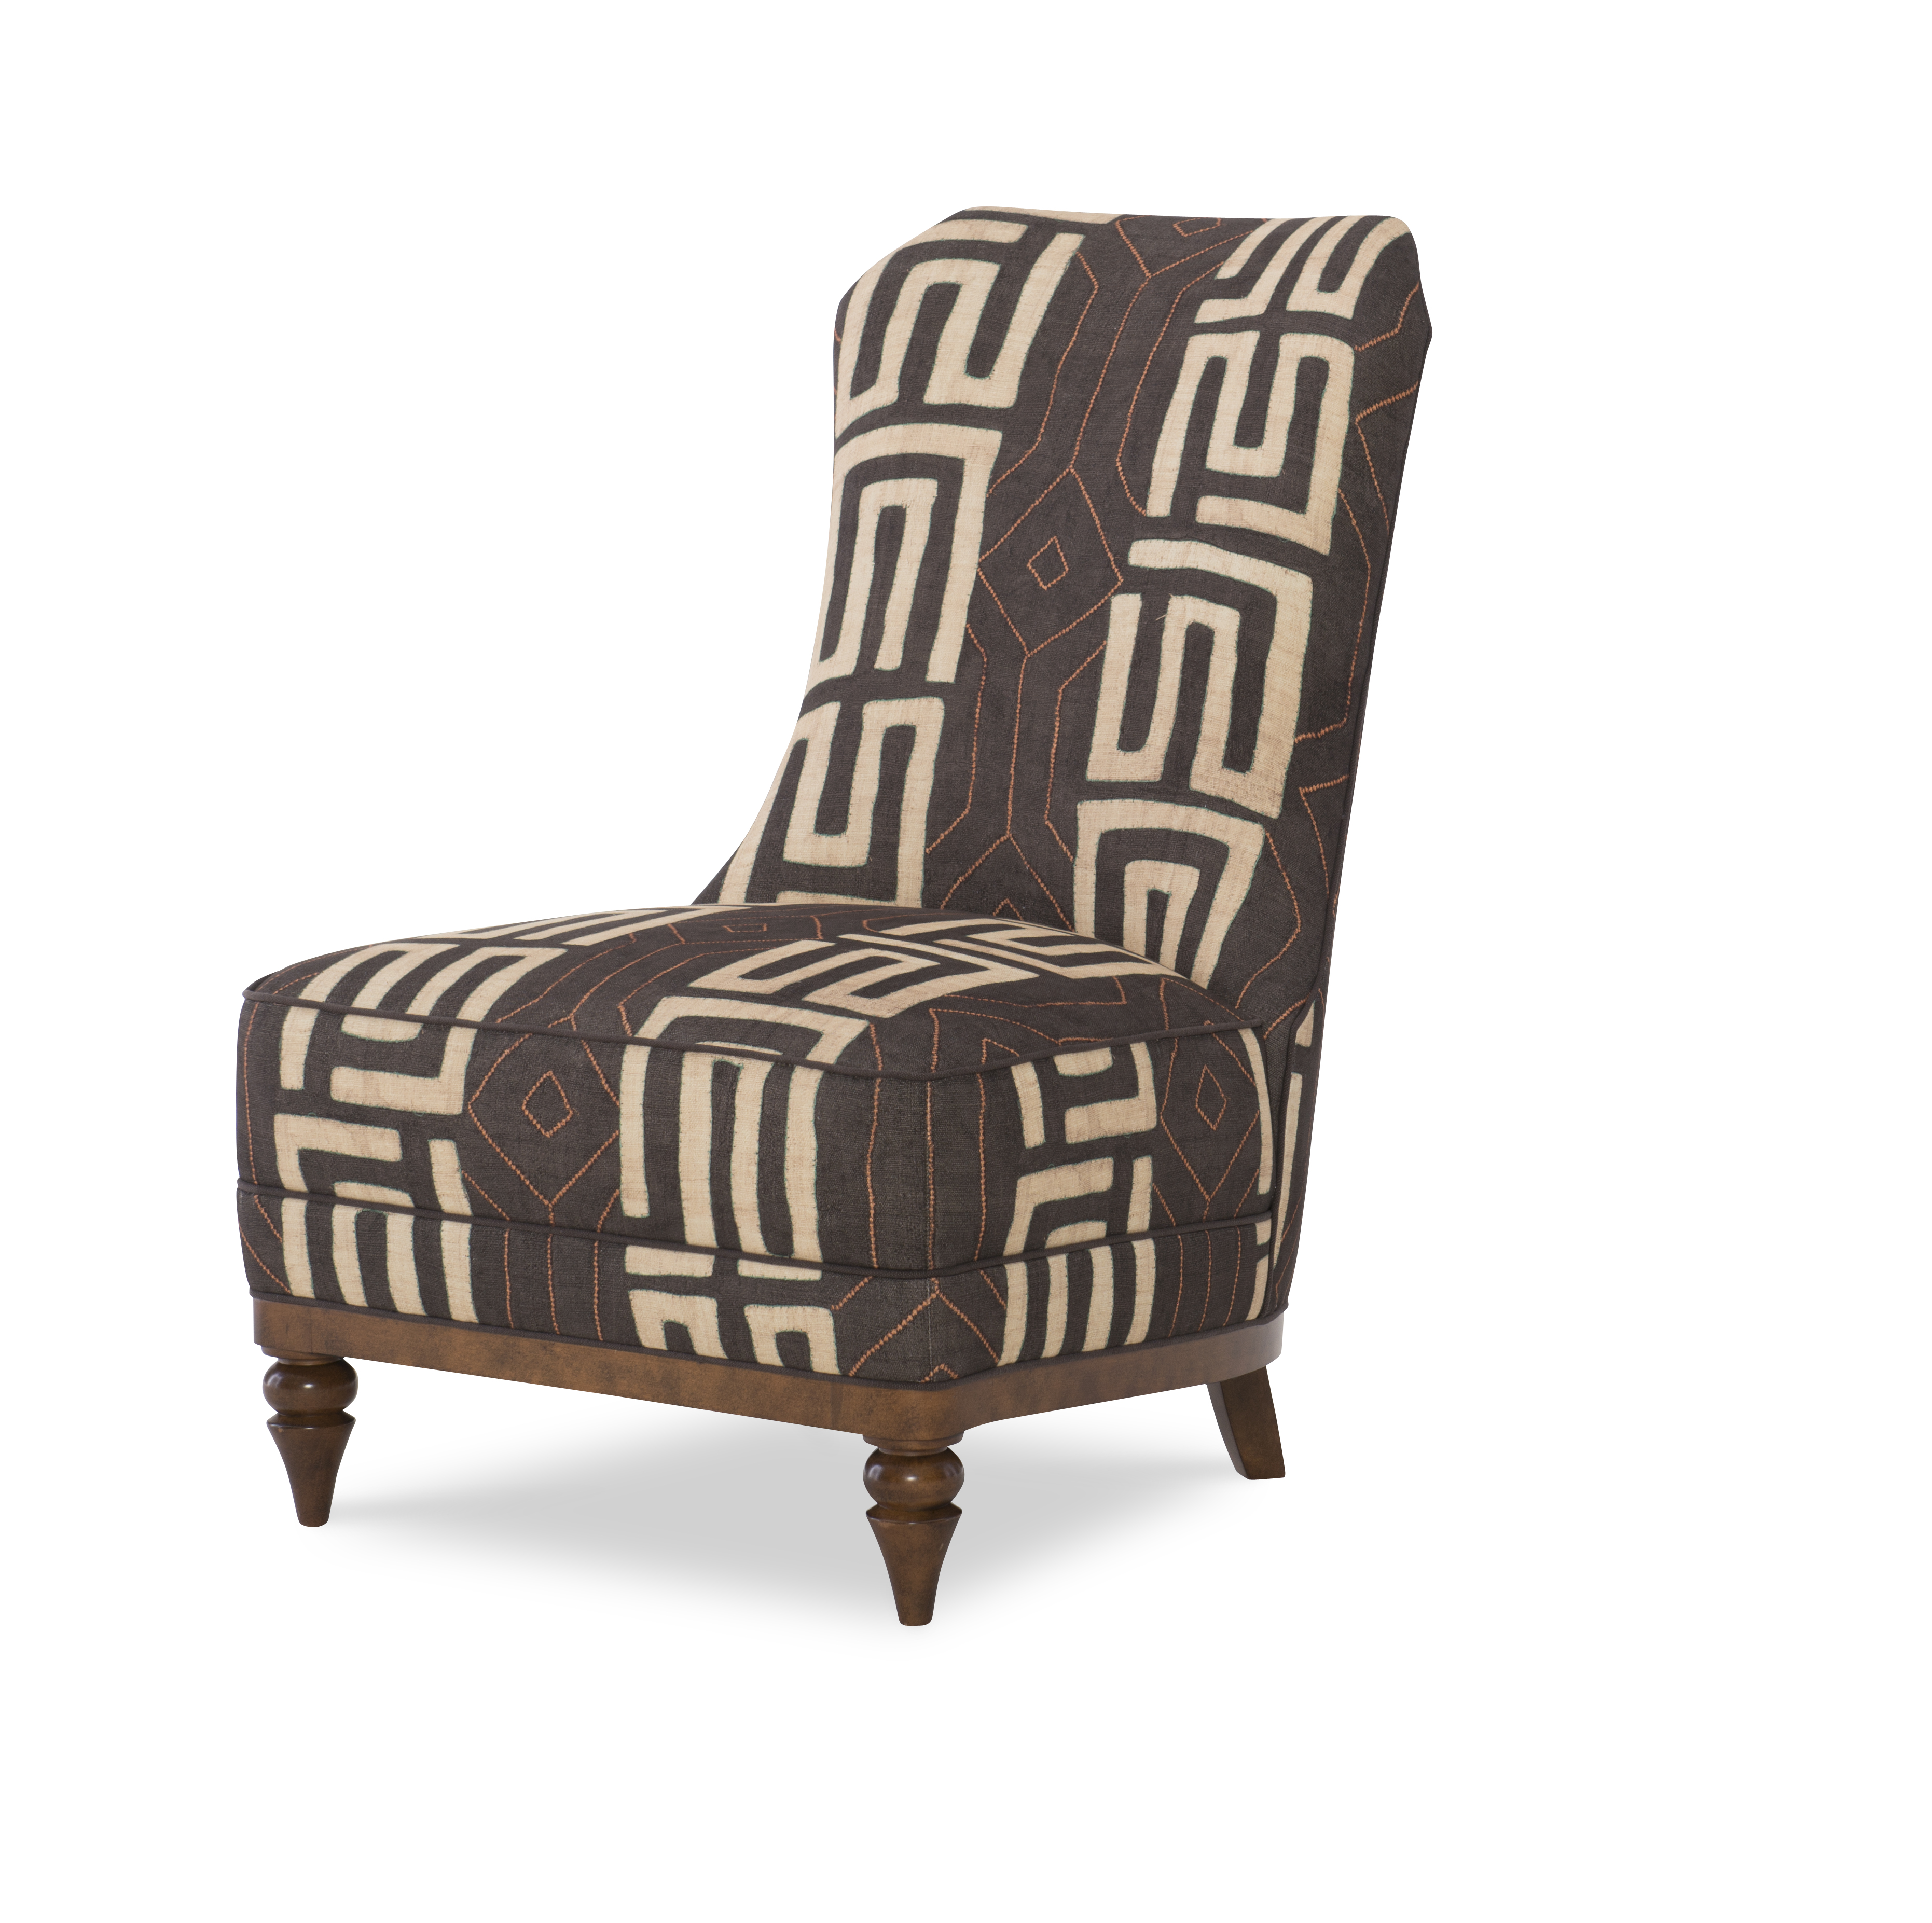 Urbane armless slipper chair with geometric patterns from Wesley Hall